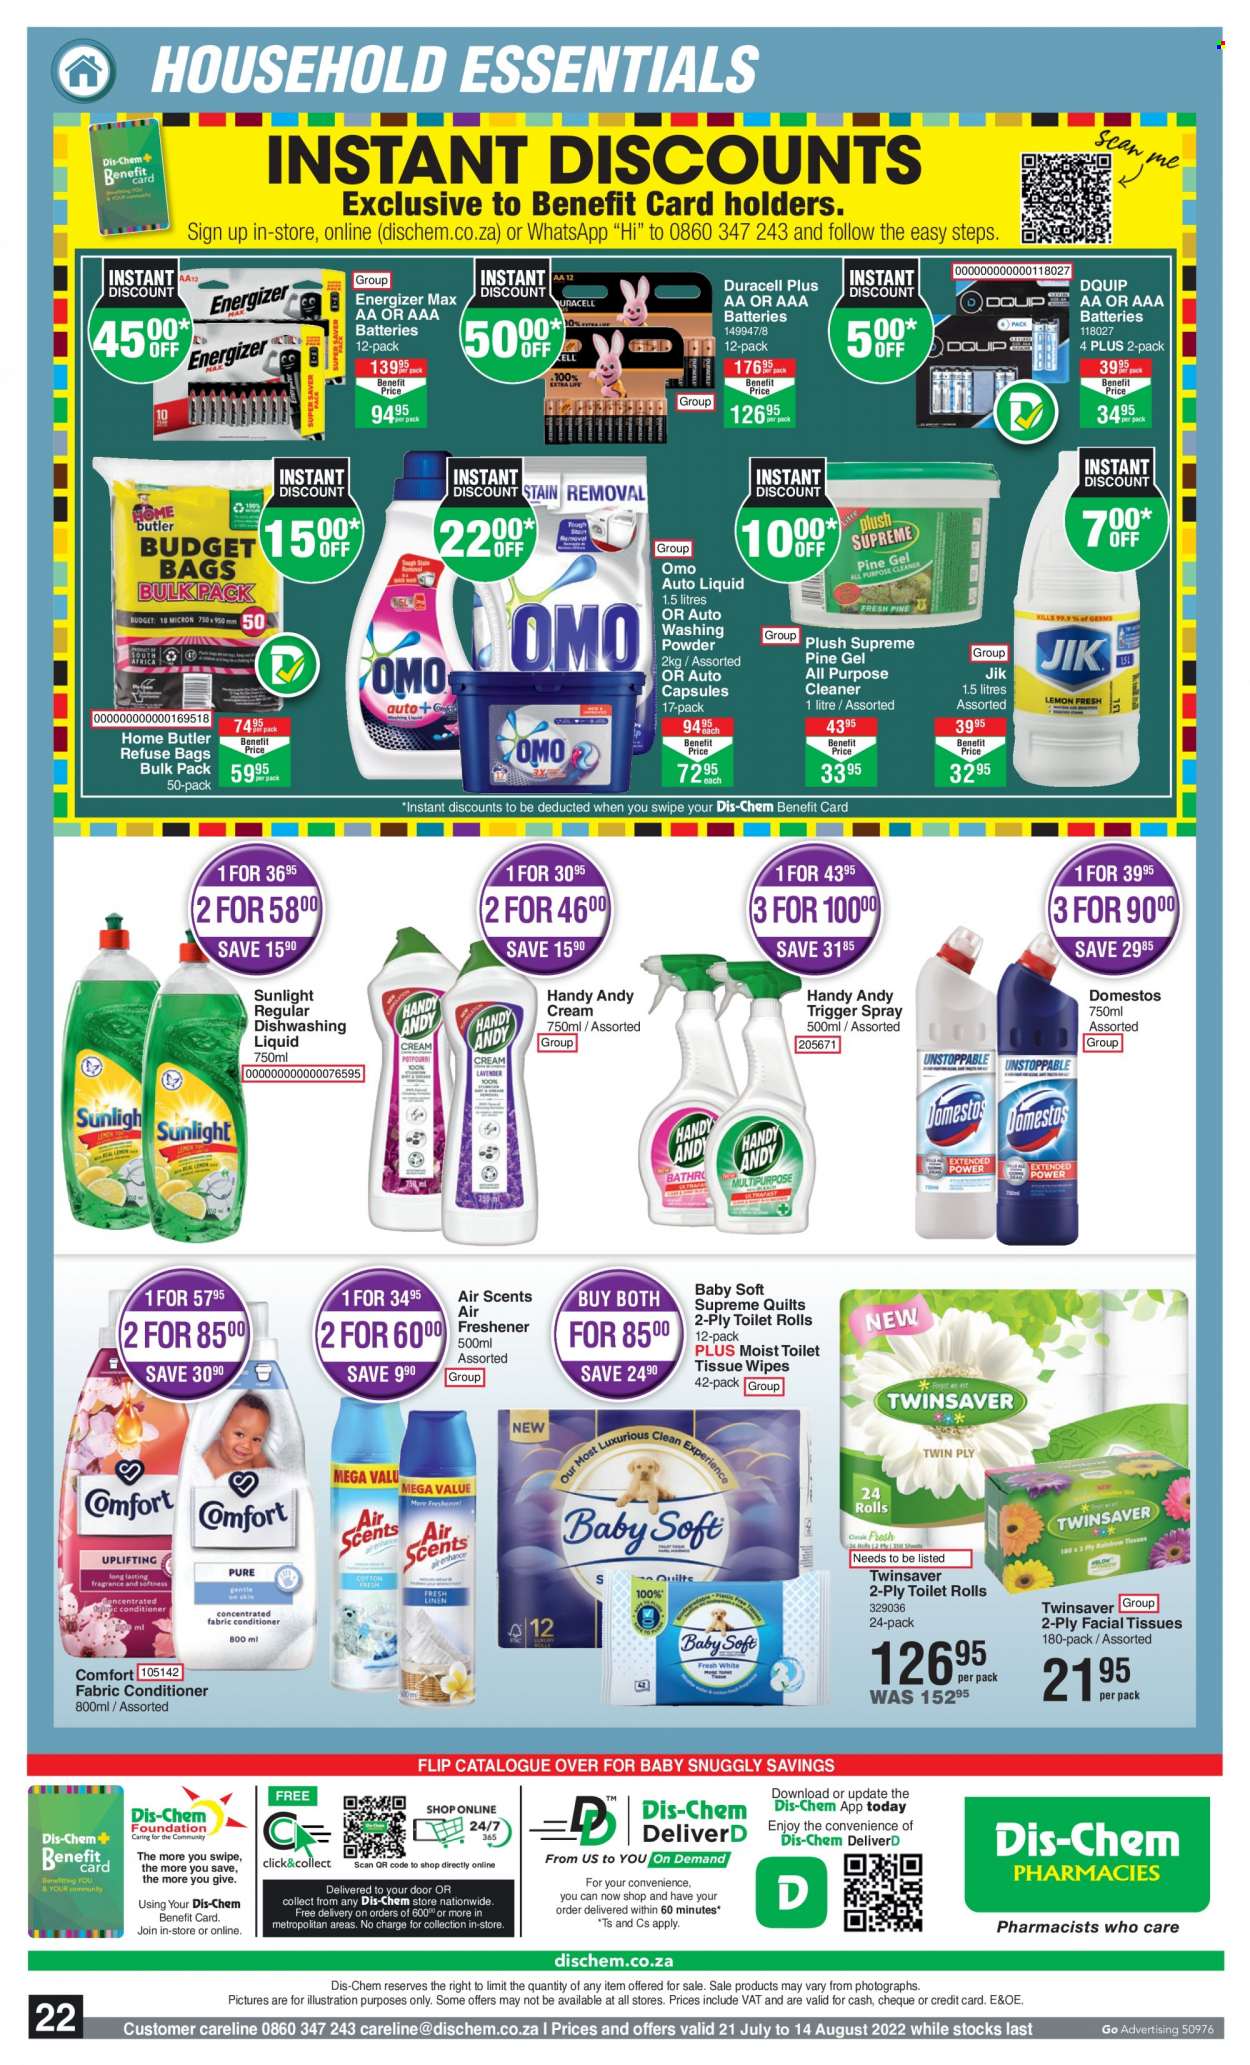 thumbnail - Dis-Chem catalogue  - 21/07/2022 - 14/08/2022 - Sales products - wipes, Baby Soft, toilet paper, Domestos, all purpose cleaner, cleaner, Omo, laundry powder, Sunlight, dishwashing liquid, facial tissues, refuse bag. Page 22.